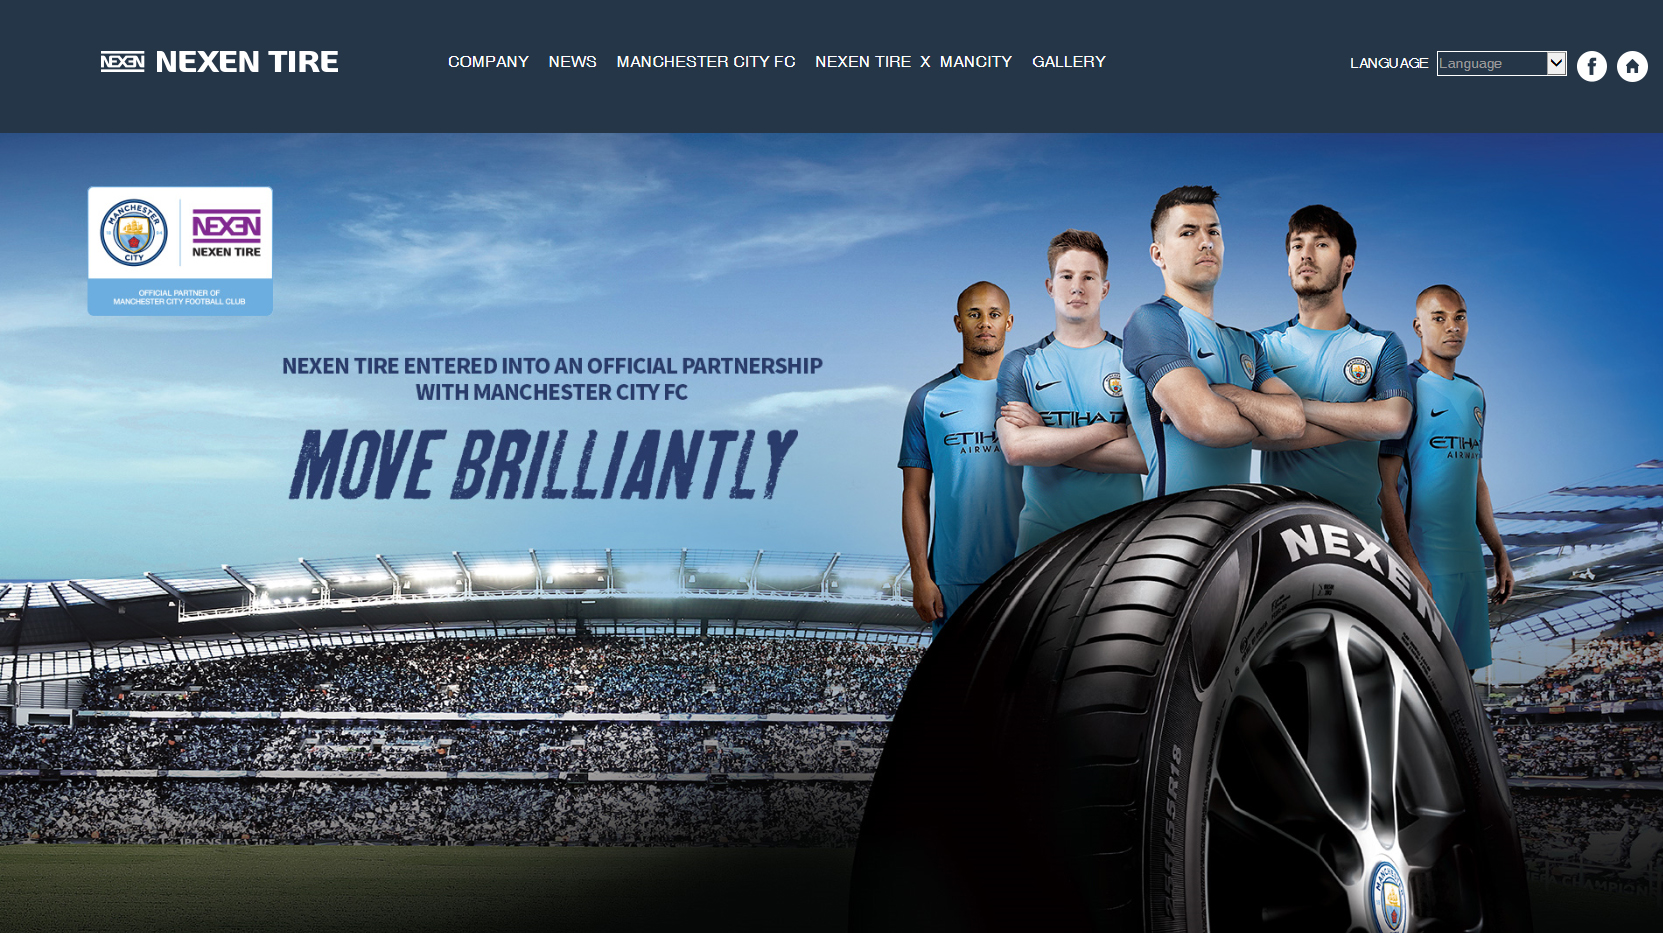 NEXEN TIRE Launches Microsite to Promote its Official Sponsorship with Manchester City Football Club